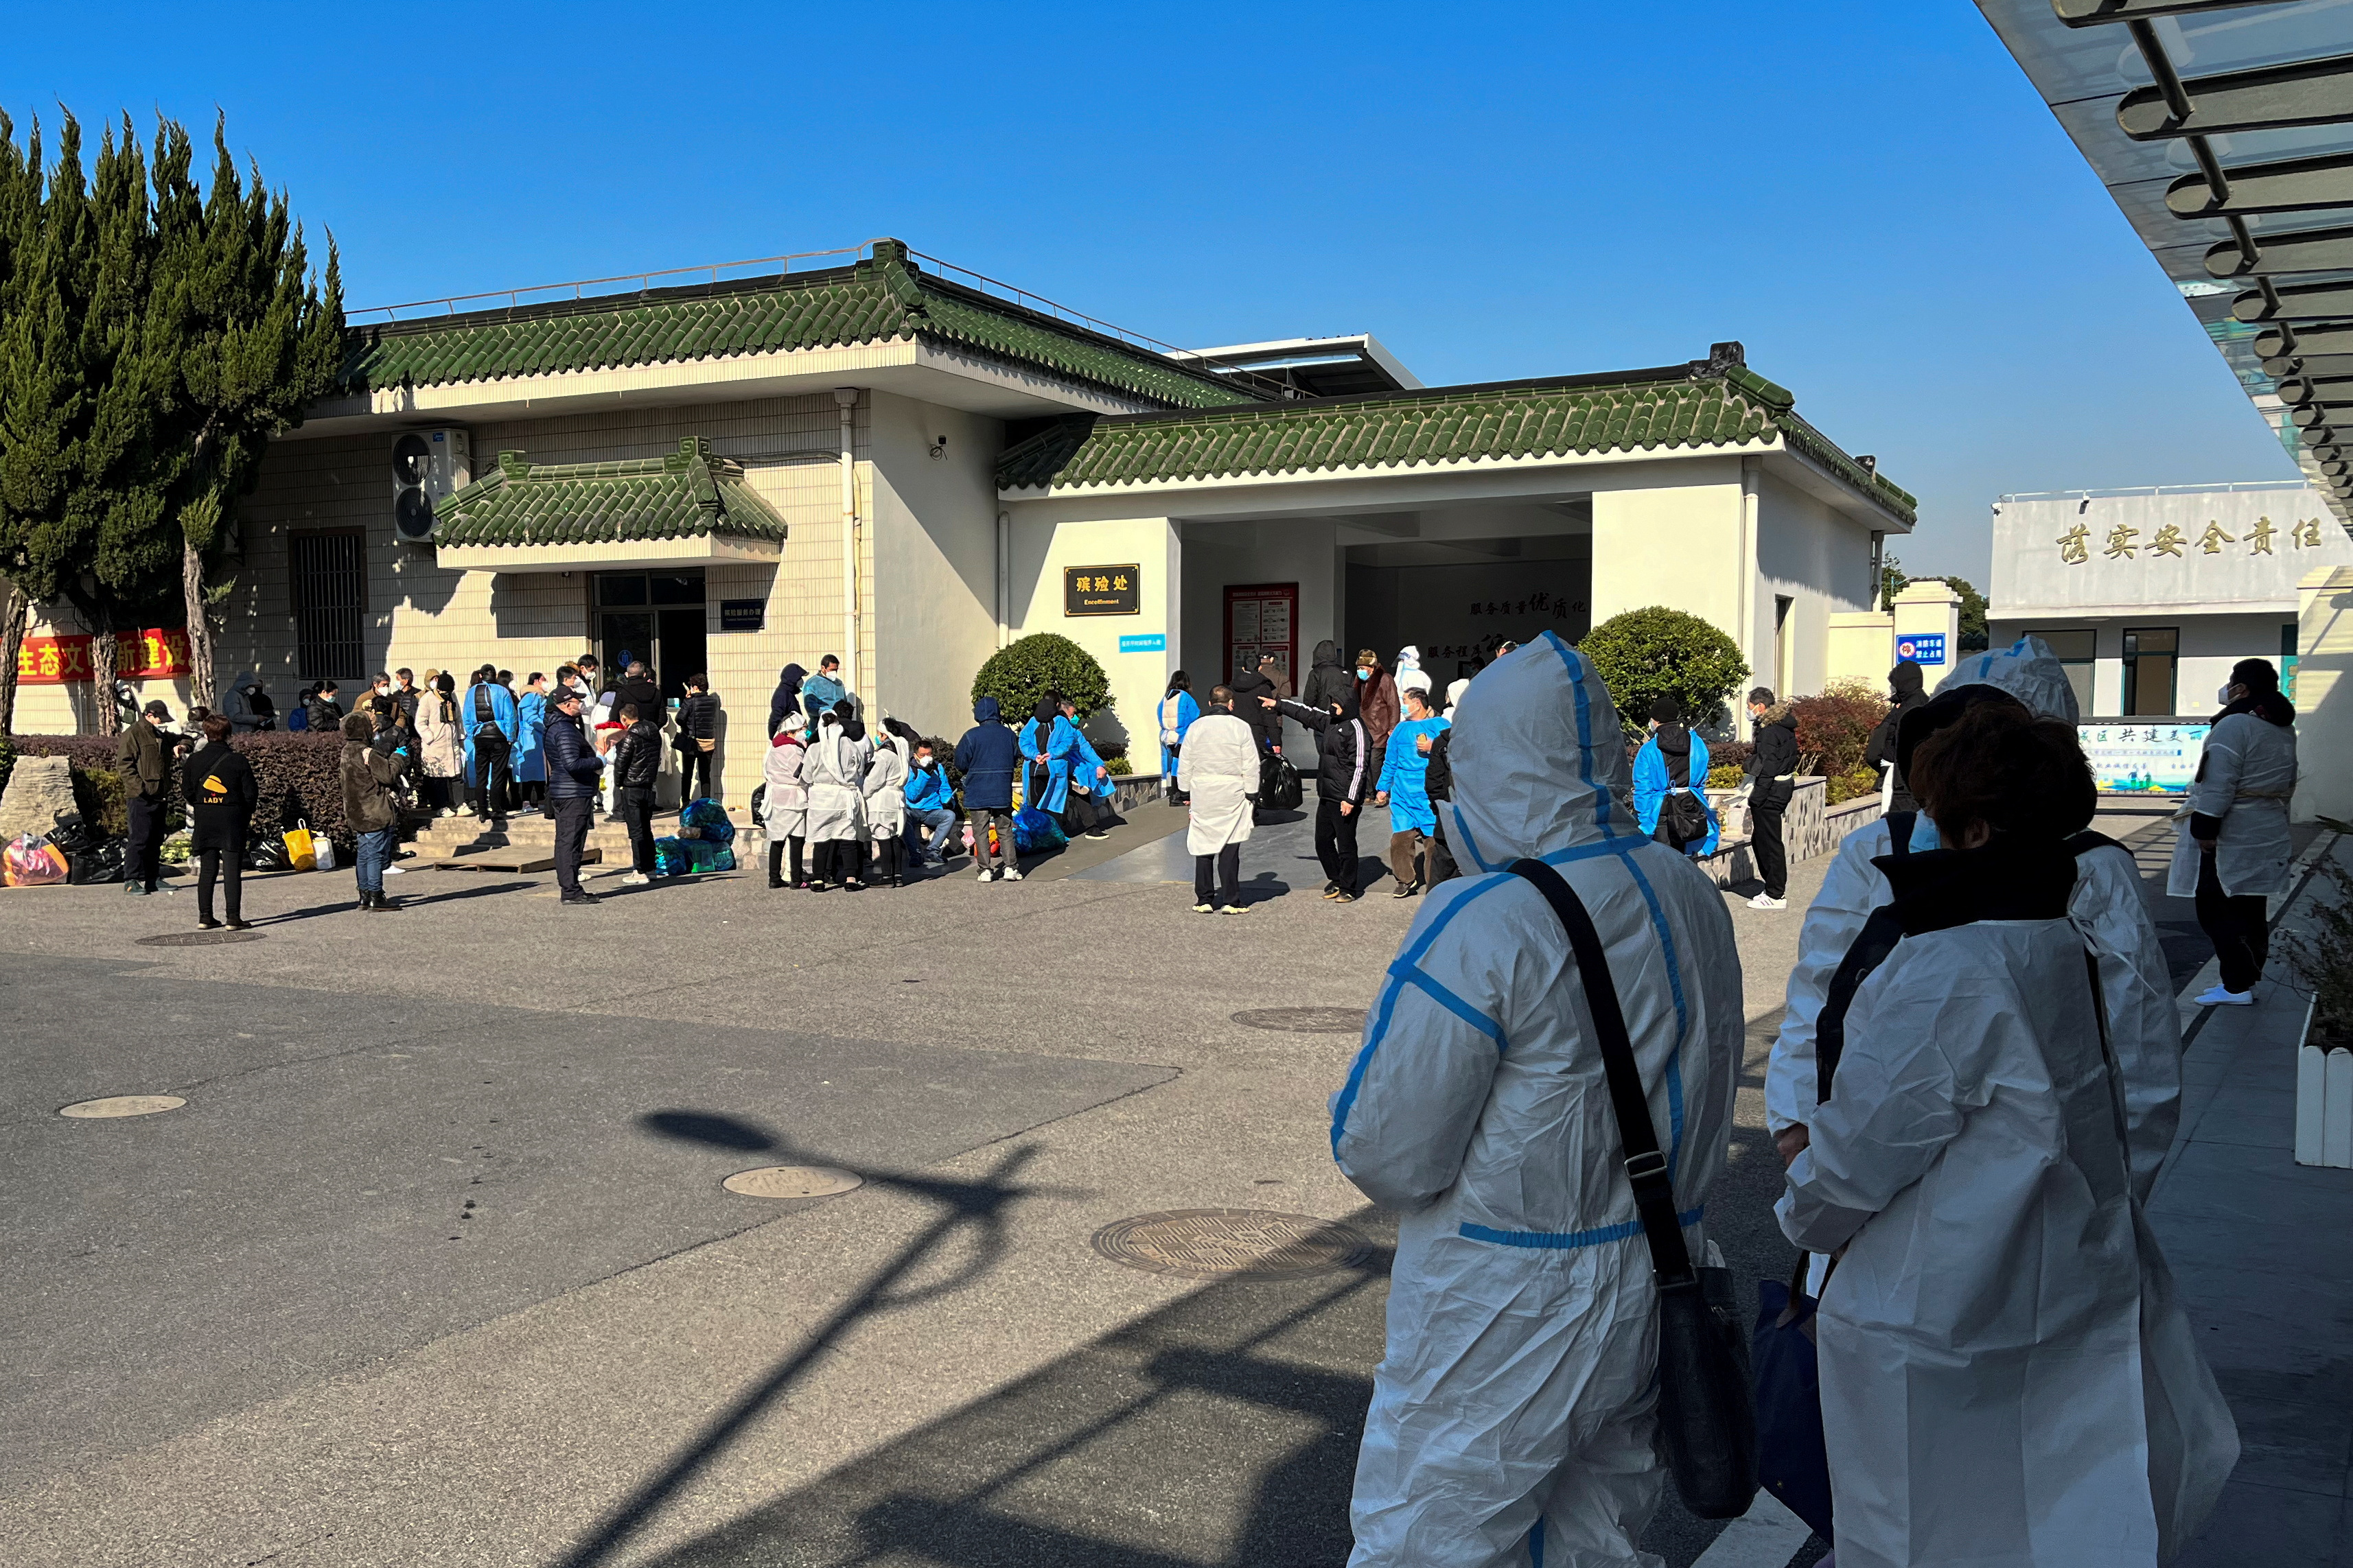 People some wearing personal protective equipment (PPE) stand outside a funeral home, as coronavirus disease (COVID-19) outbreak continues, in Shanghai